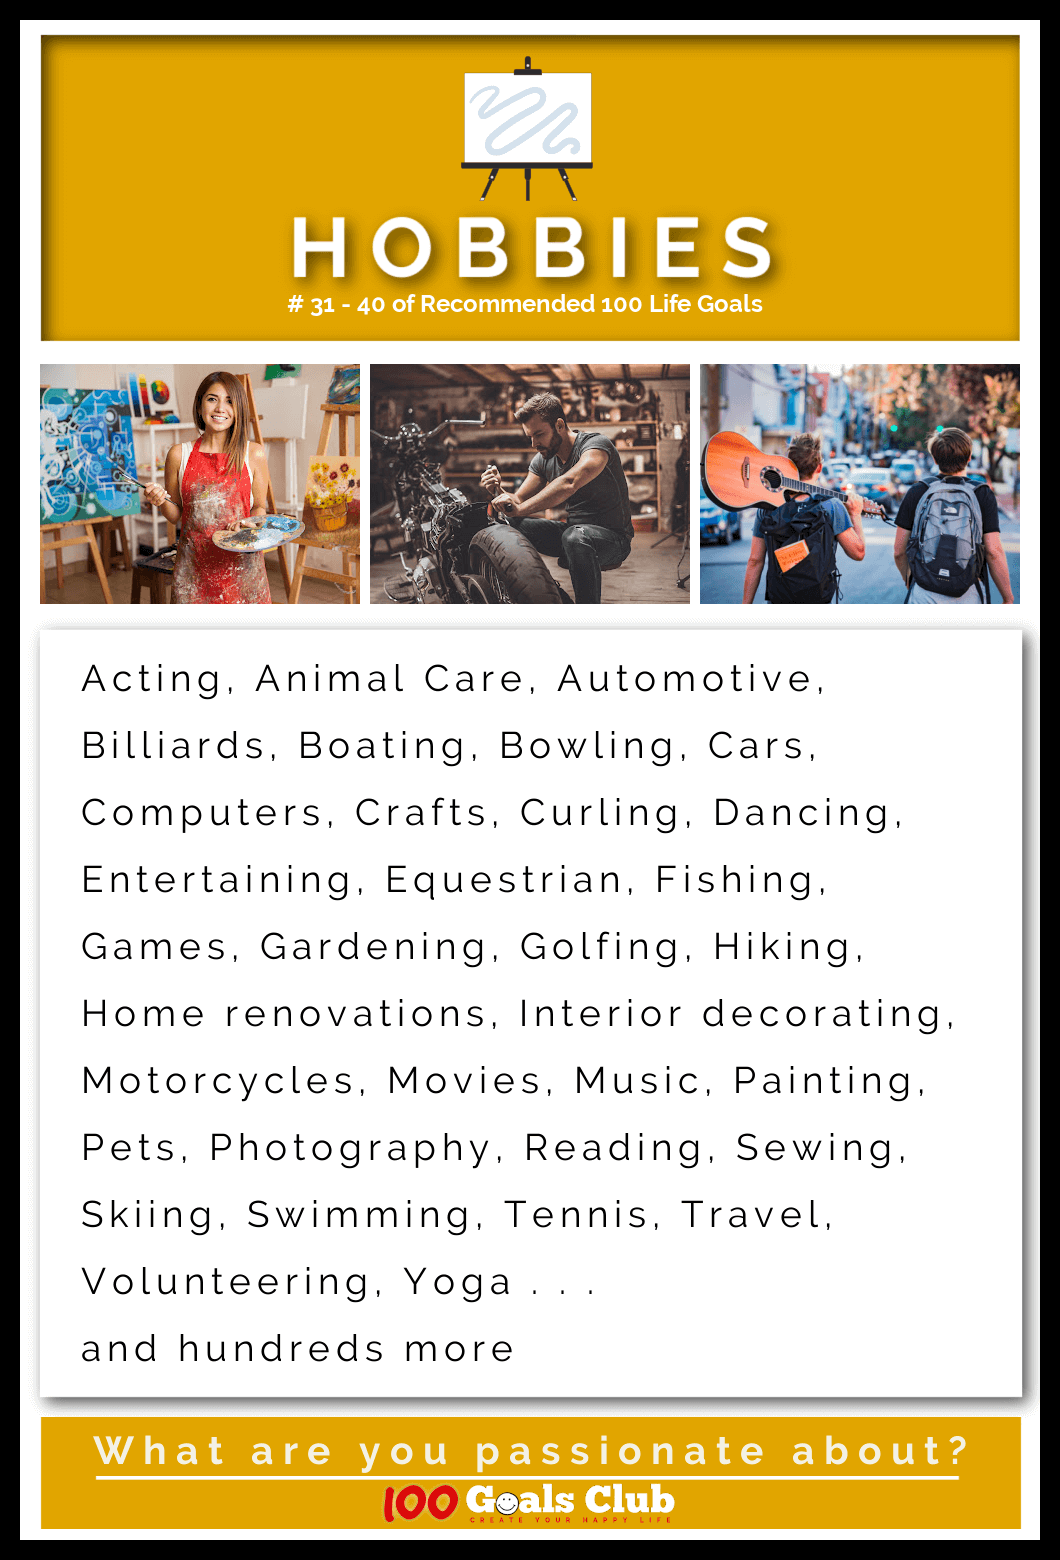 What are YOUR hobbies?